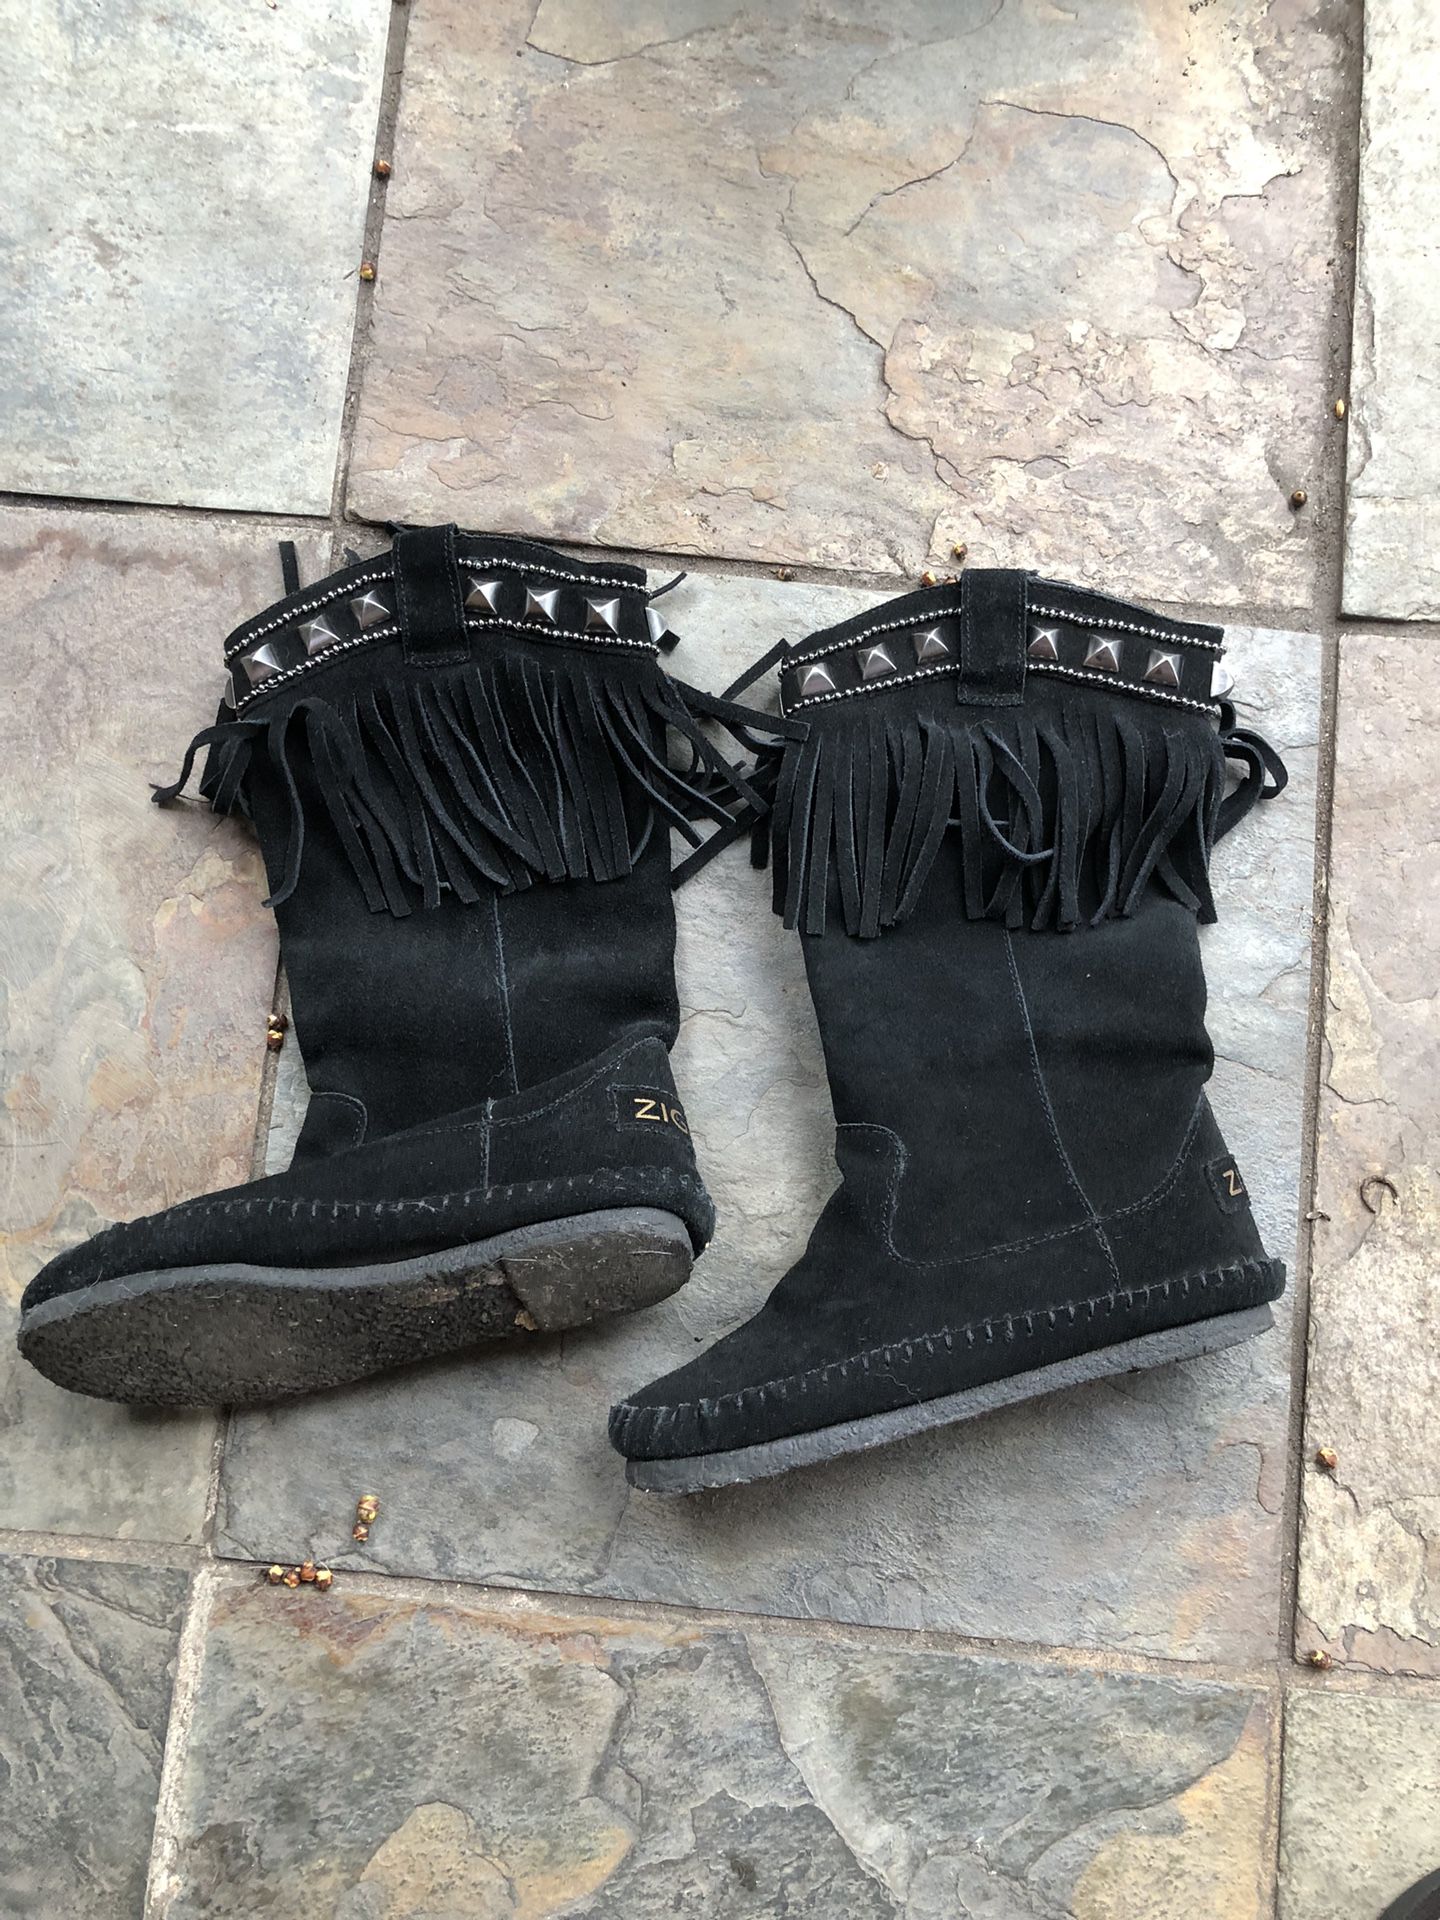 Ziti Girl Suede Leather Boots With Fringes Size 6 Preowned 